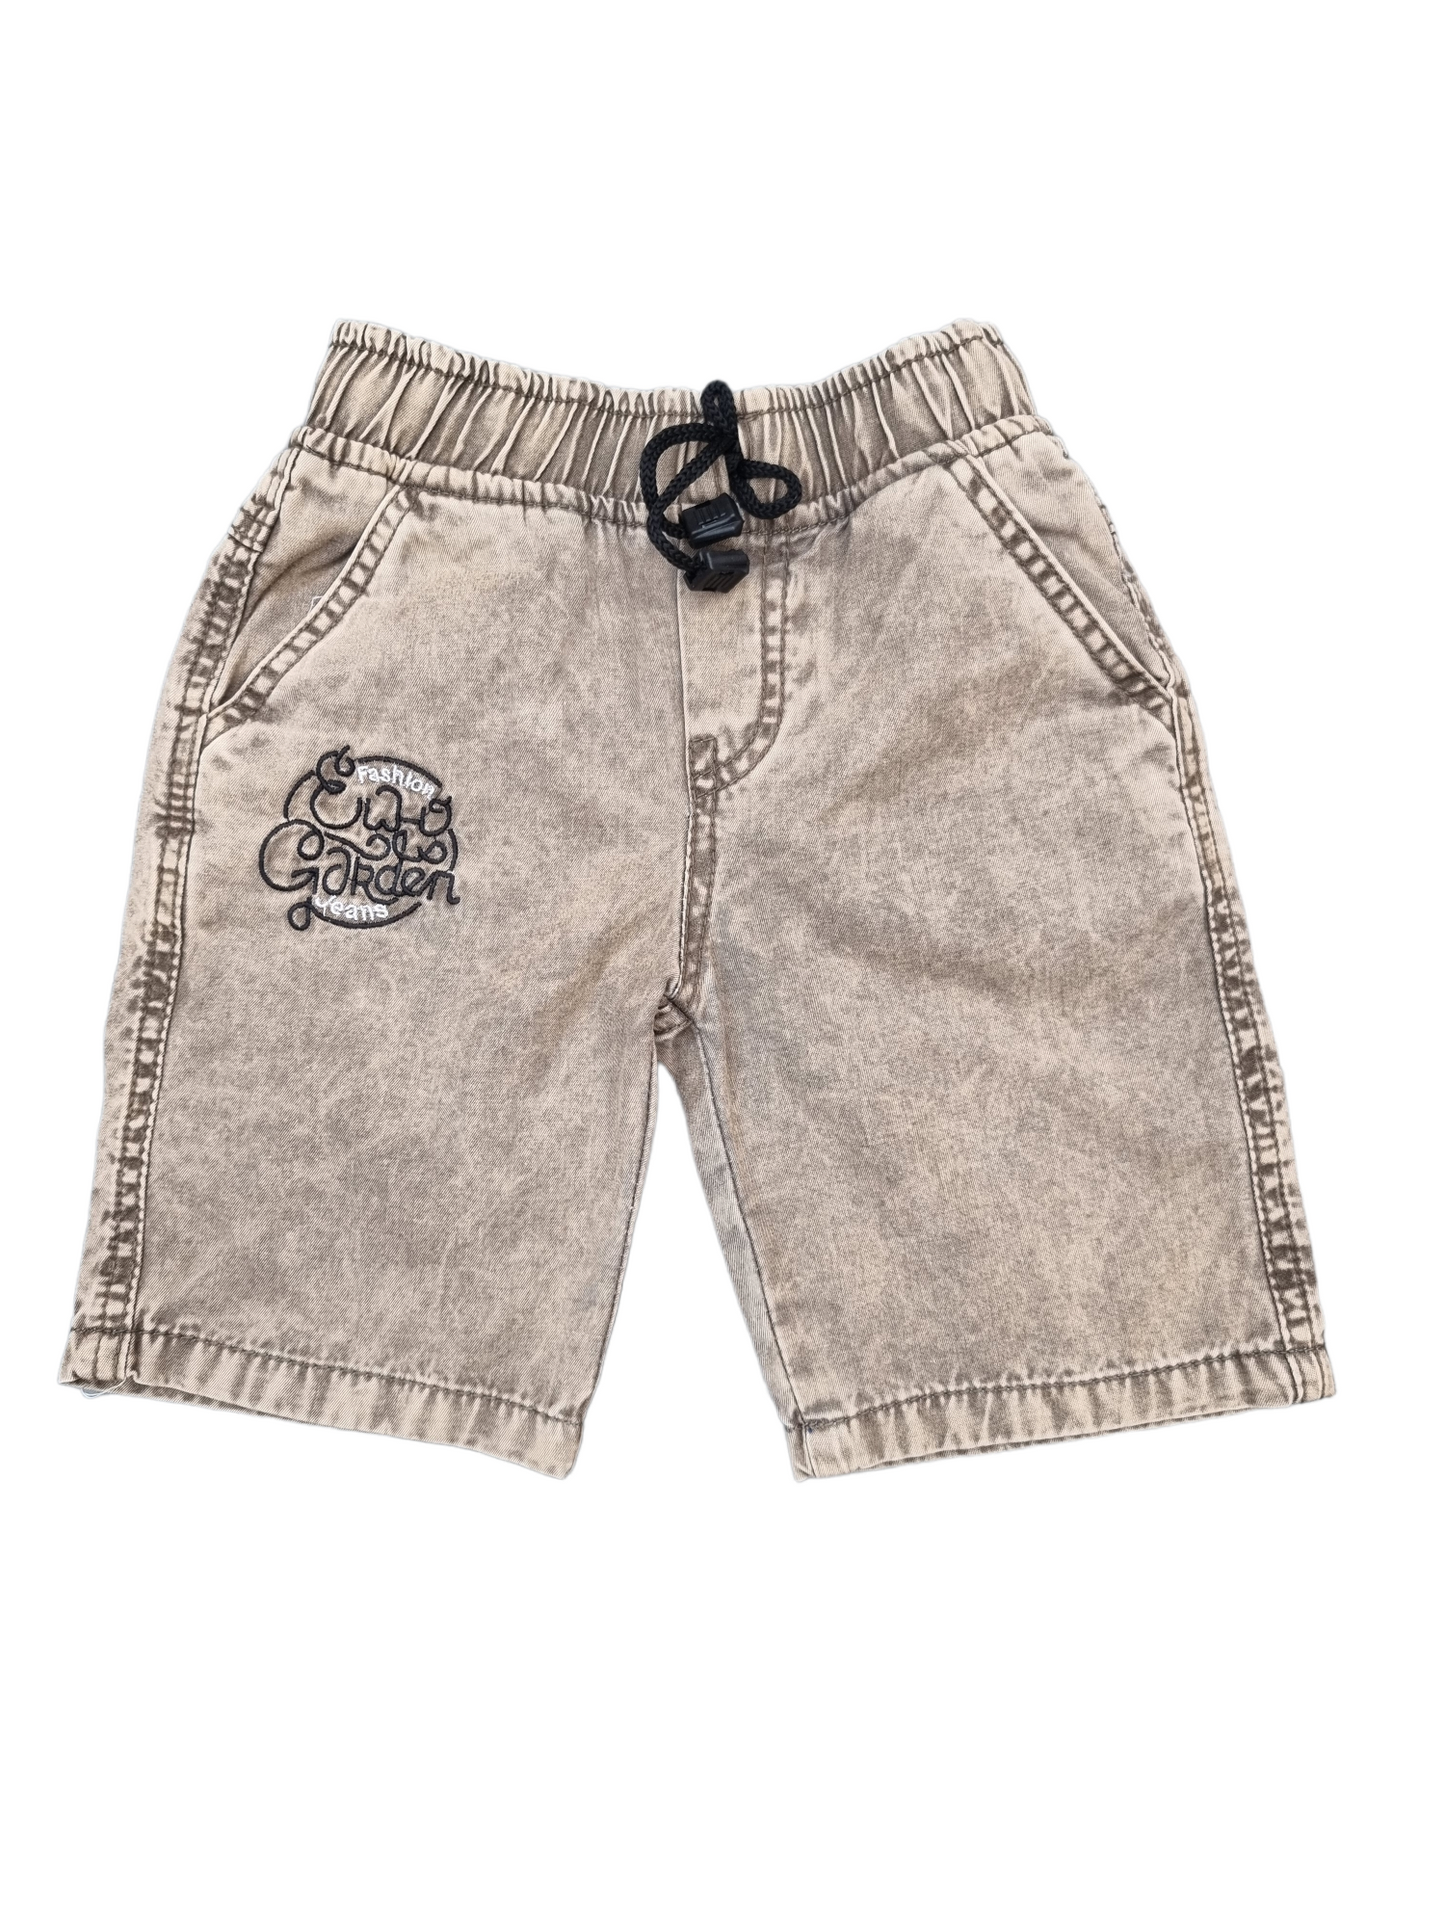 Brown Embroidery Jeans Short